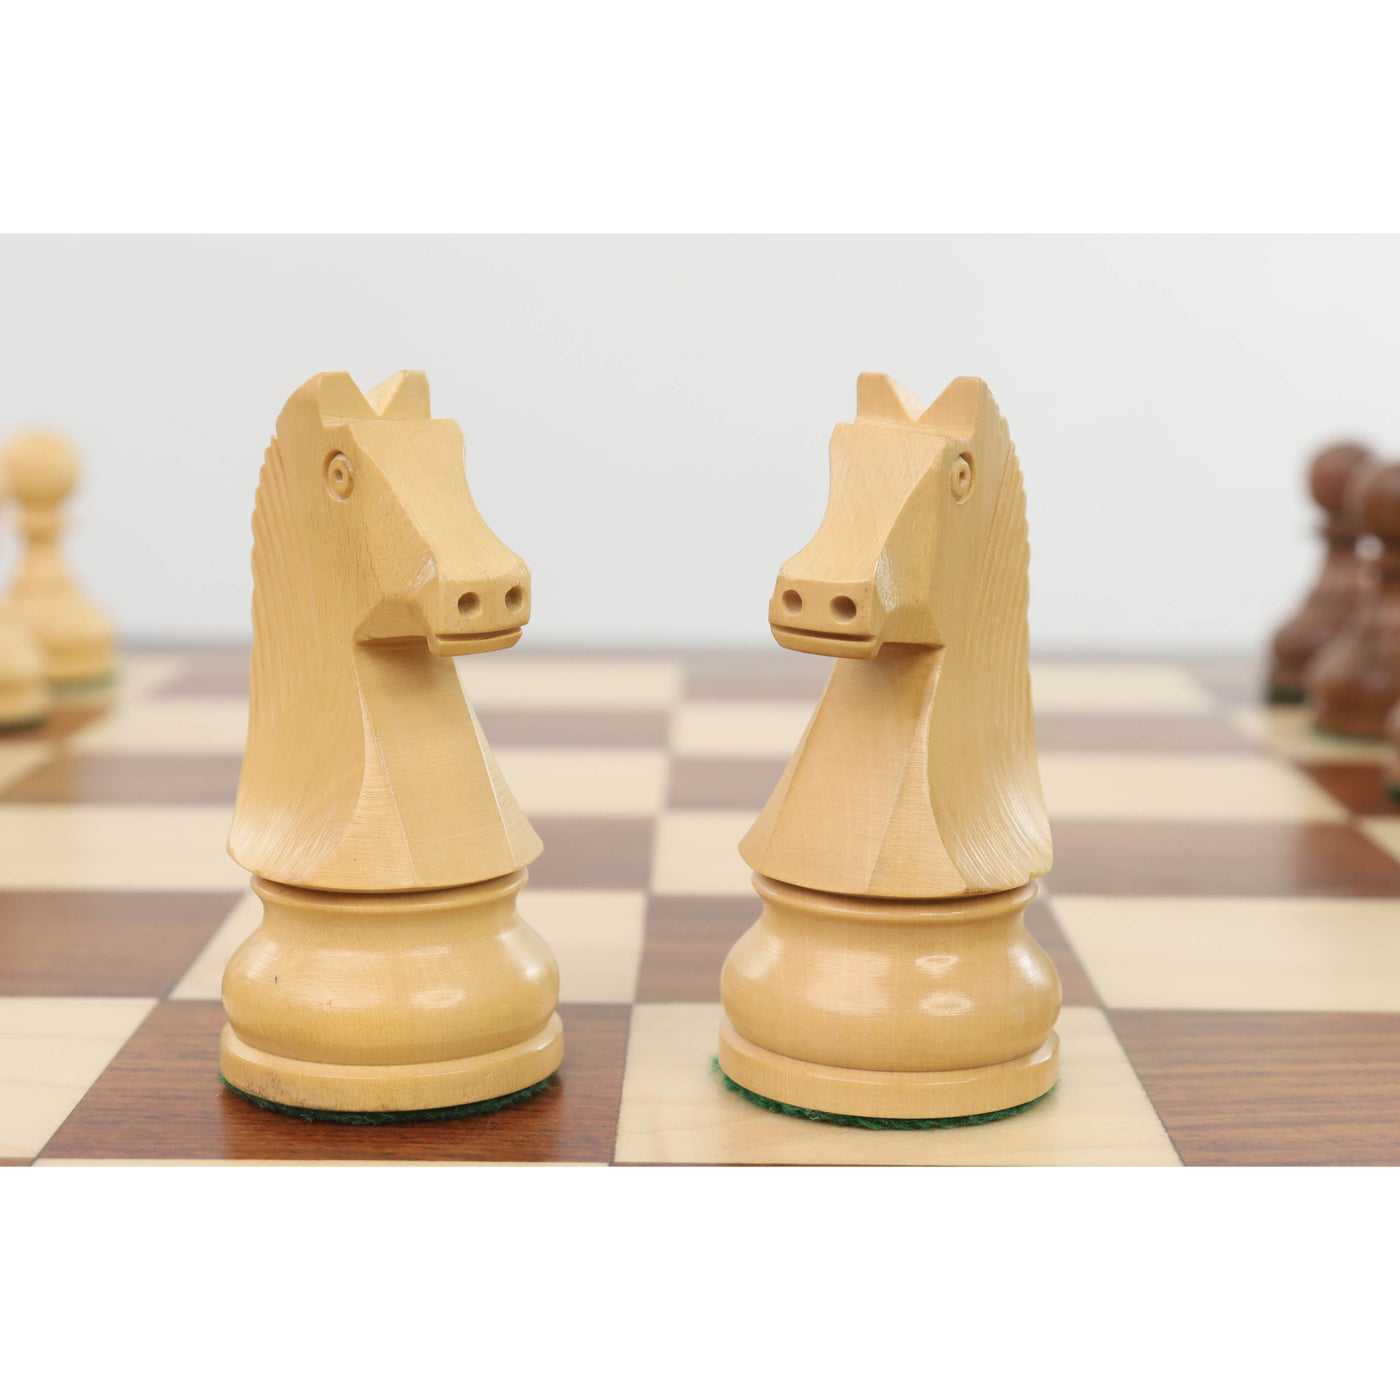 3.9" Tournament Chess Set Combo -Pieces in Golden Rosewood with Board and Box